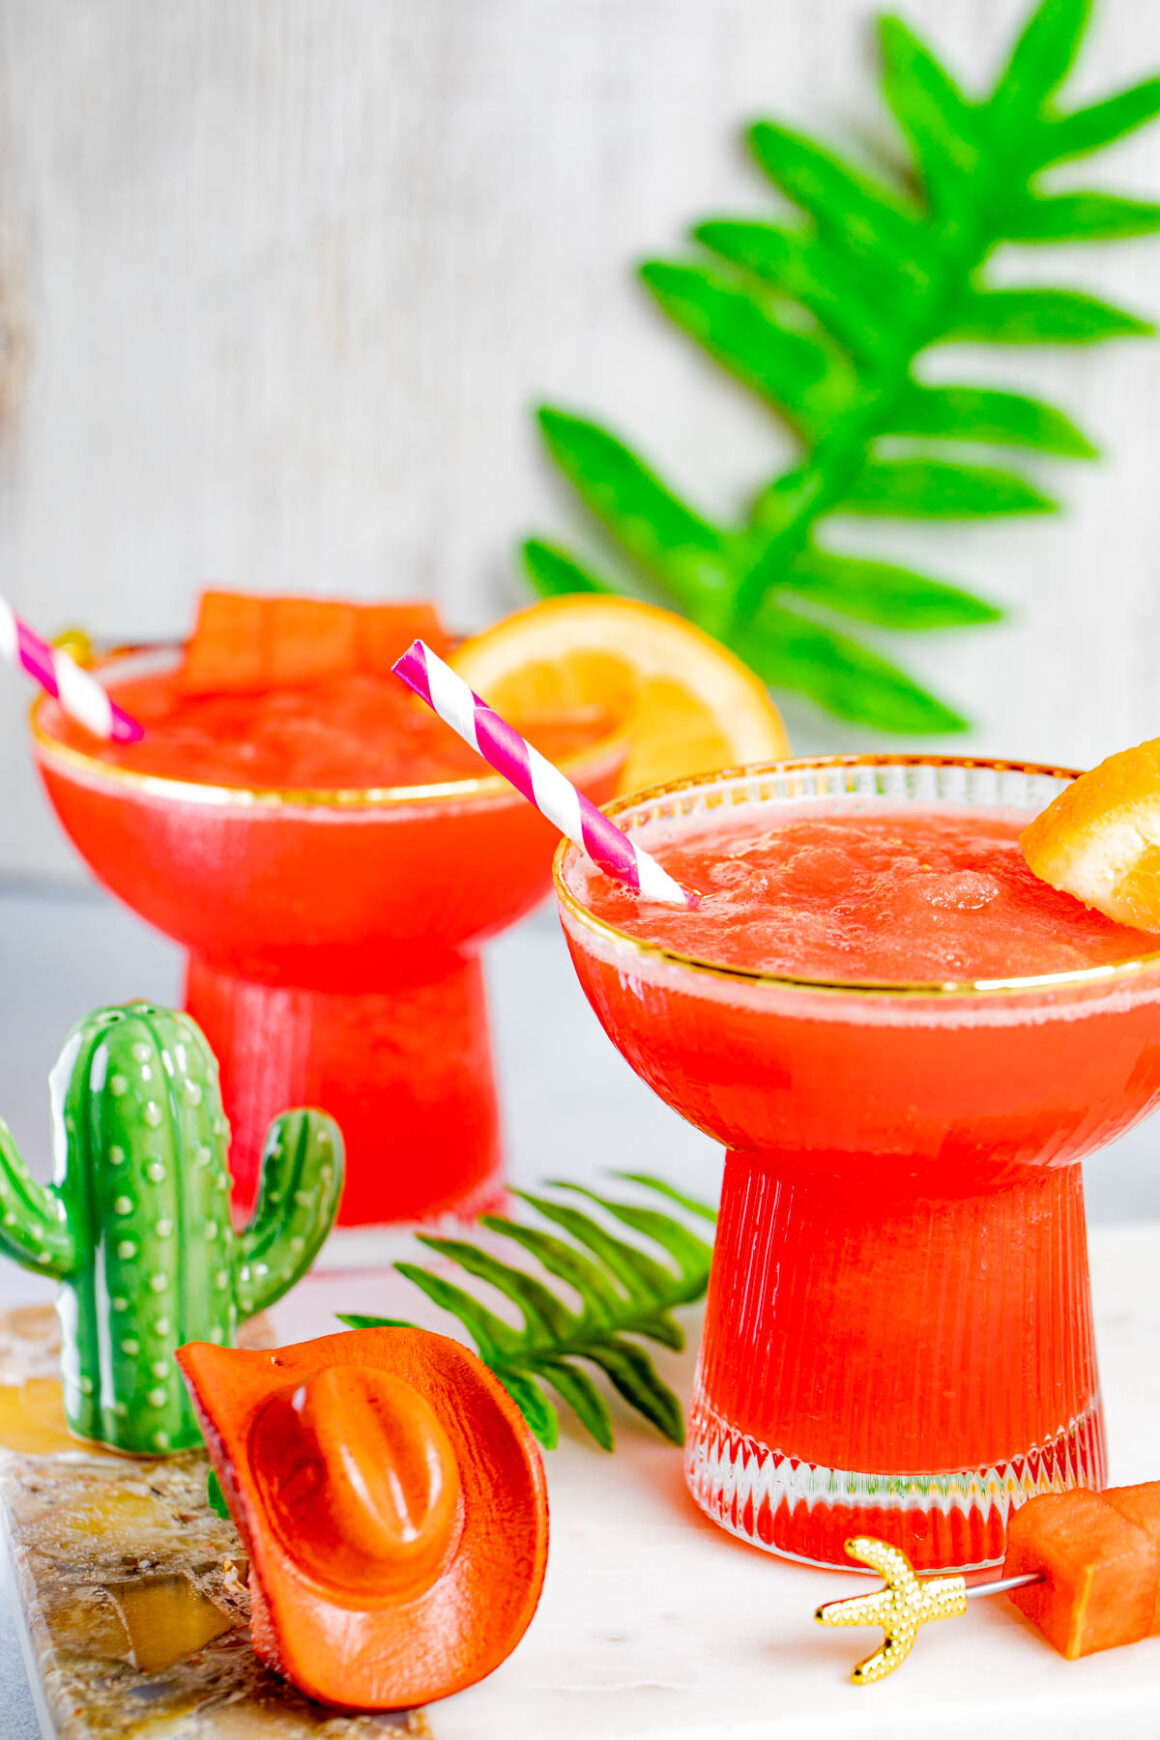 This tropical and refreshing Watermelon Margarita recipe is perfect for this summer that is just around the corner, enjoy its bright red color and its fresh flavor mixed with tequila to make the perfect match!